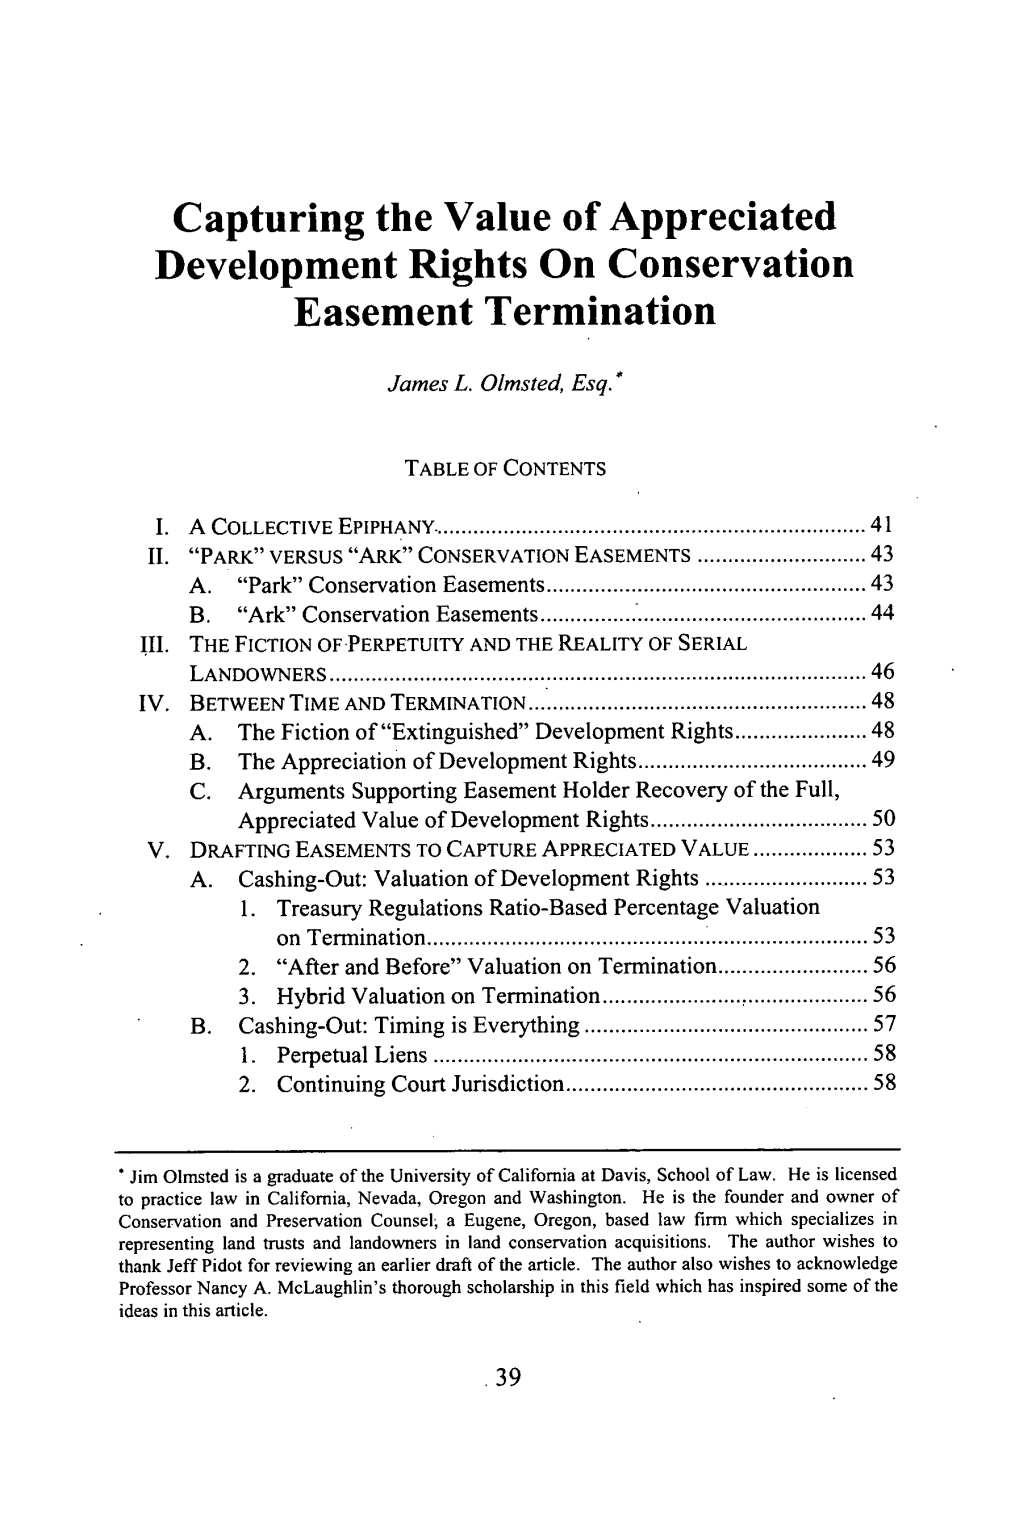 Capturing the Value of Appreciated Development Rights on Conservation Easement Termination